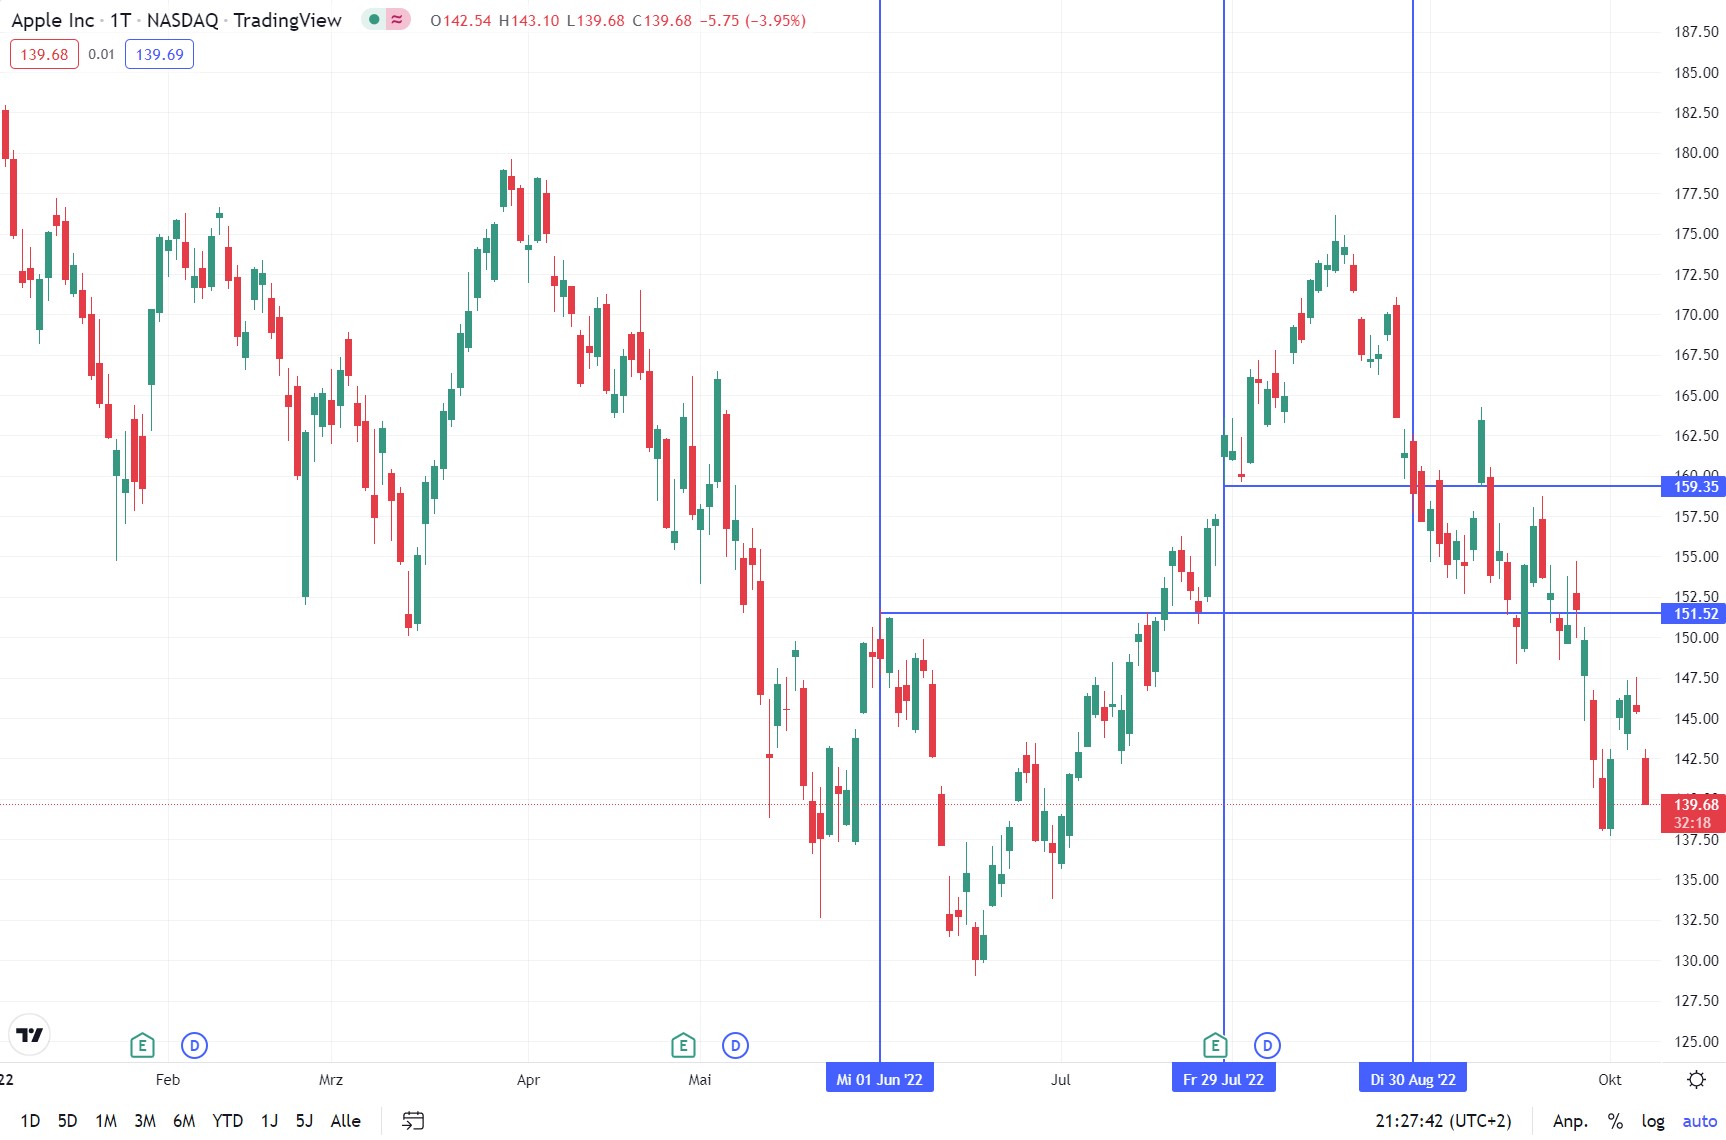 A Stop Loss Order example. Apple stock falls, and you want to secure your profits in case prices continue to fall. You sell with a Stop Loss Order that you define based on the previous low. The stop price, as the chart shows on July 29, 2022, is $159.35. Prices continue to fall and your order will be filled on August 30, 2022. Your winnings are secured.